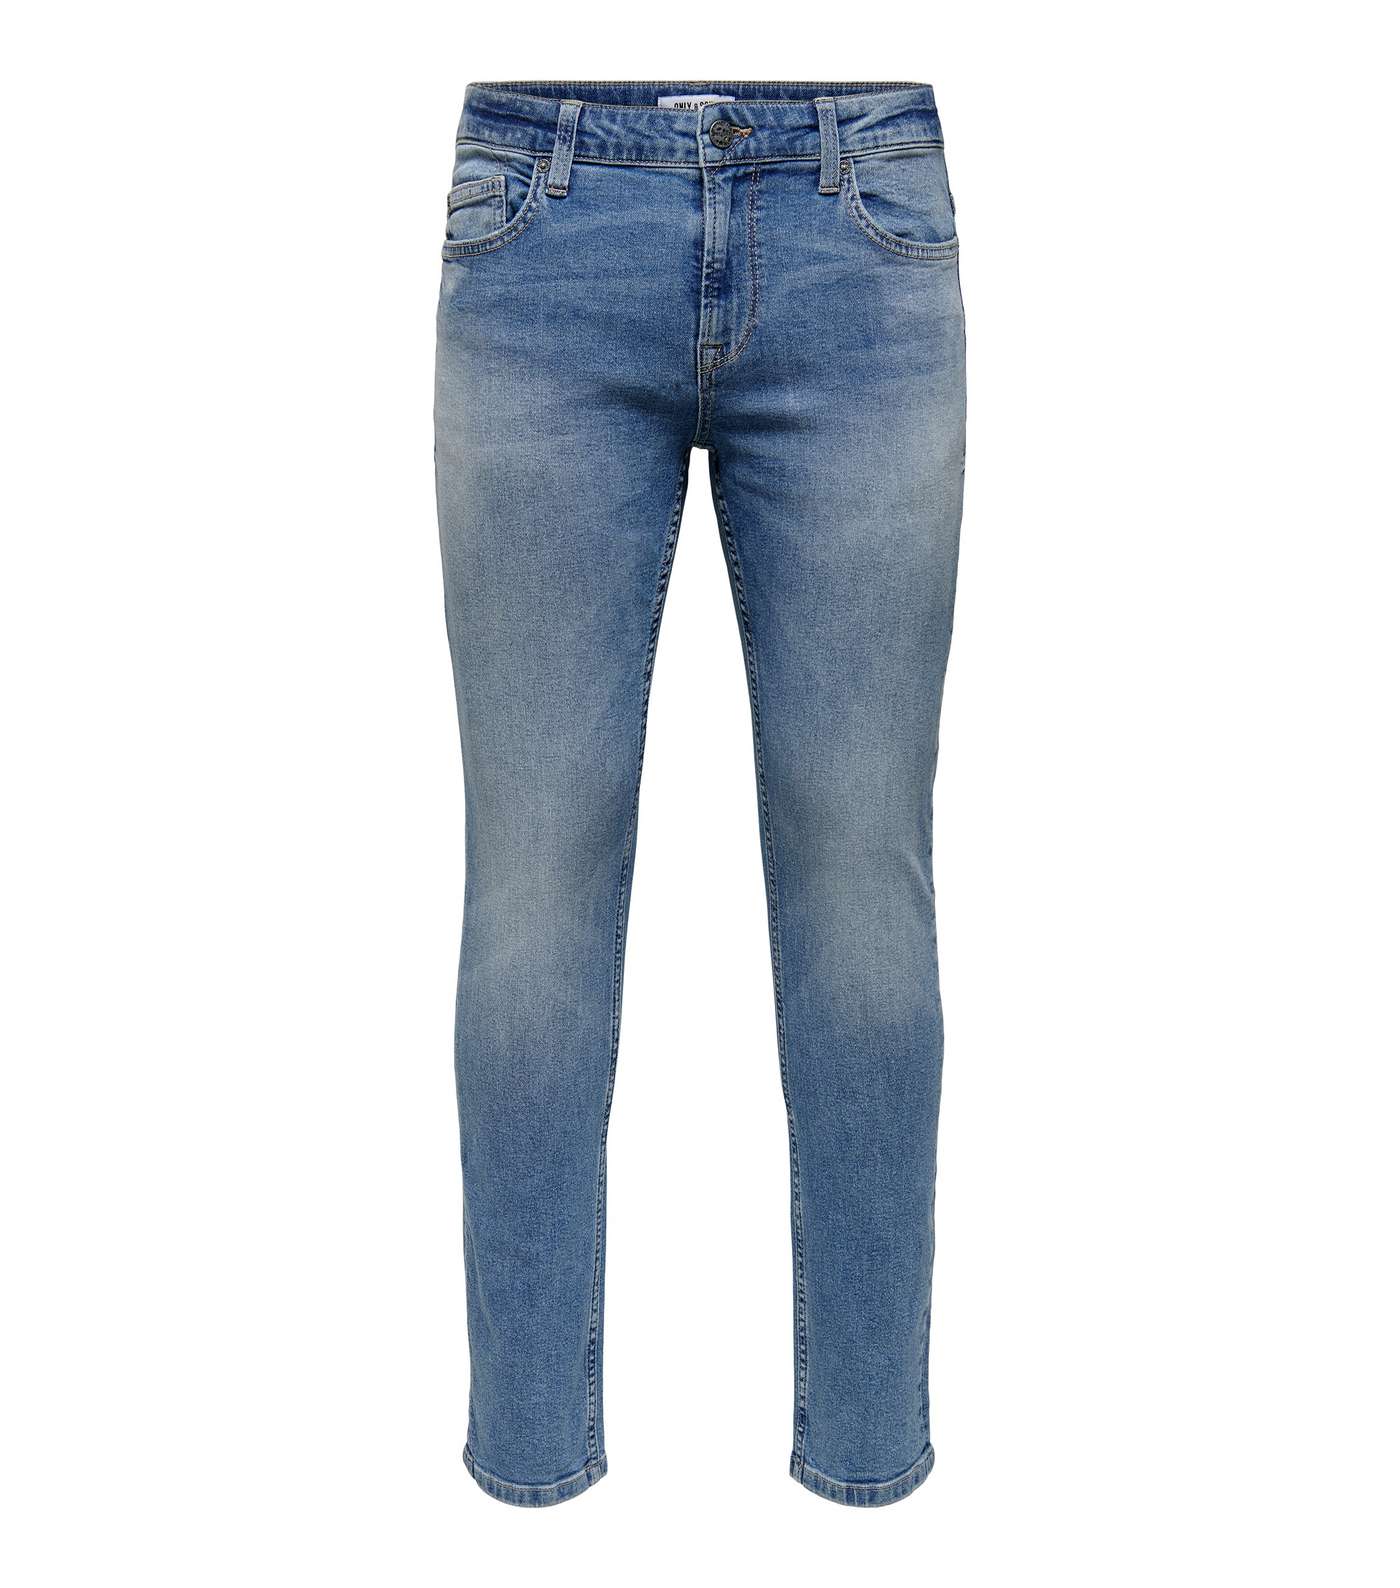 Only & Sons Bright Blue Slim Fit Jeans Image 4